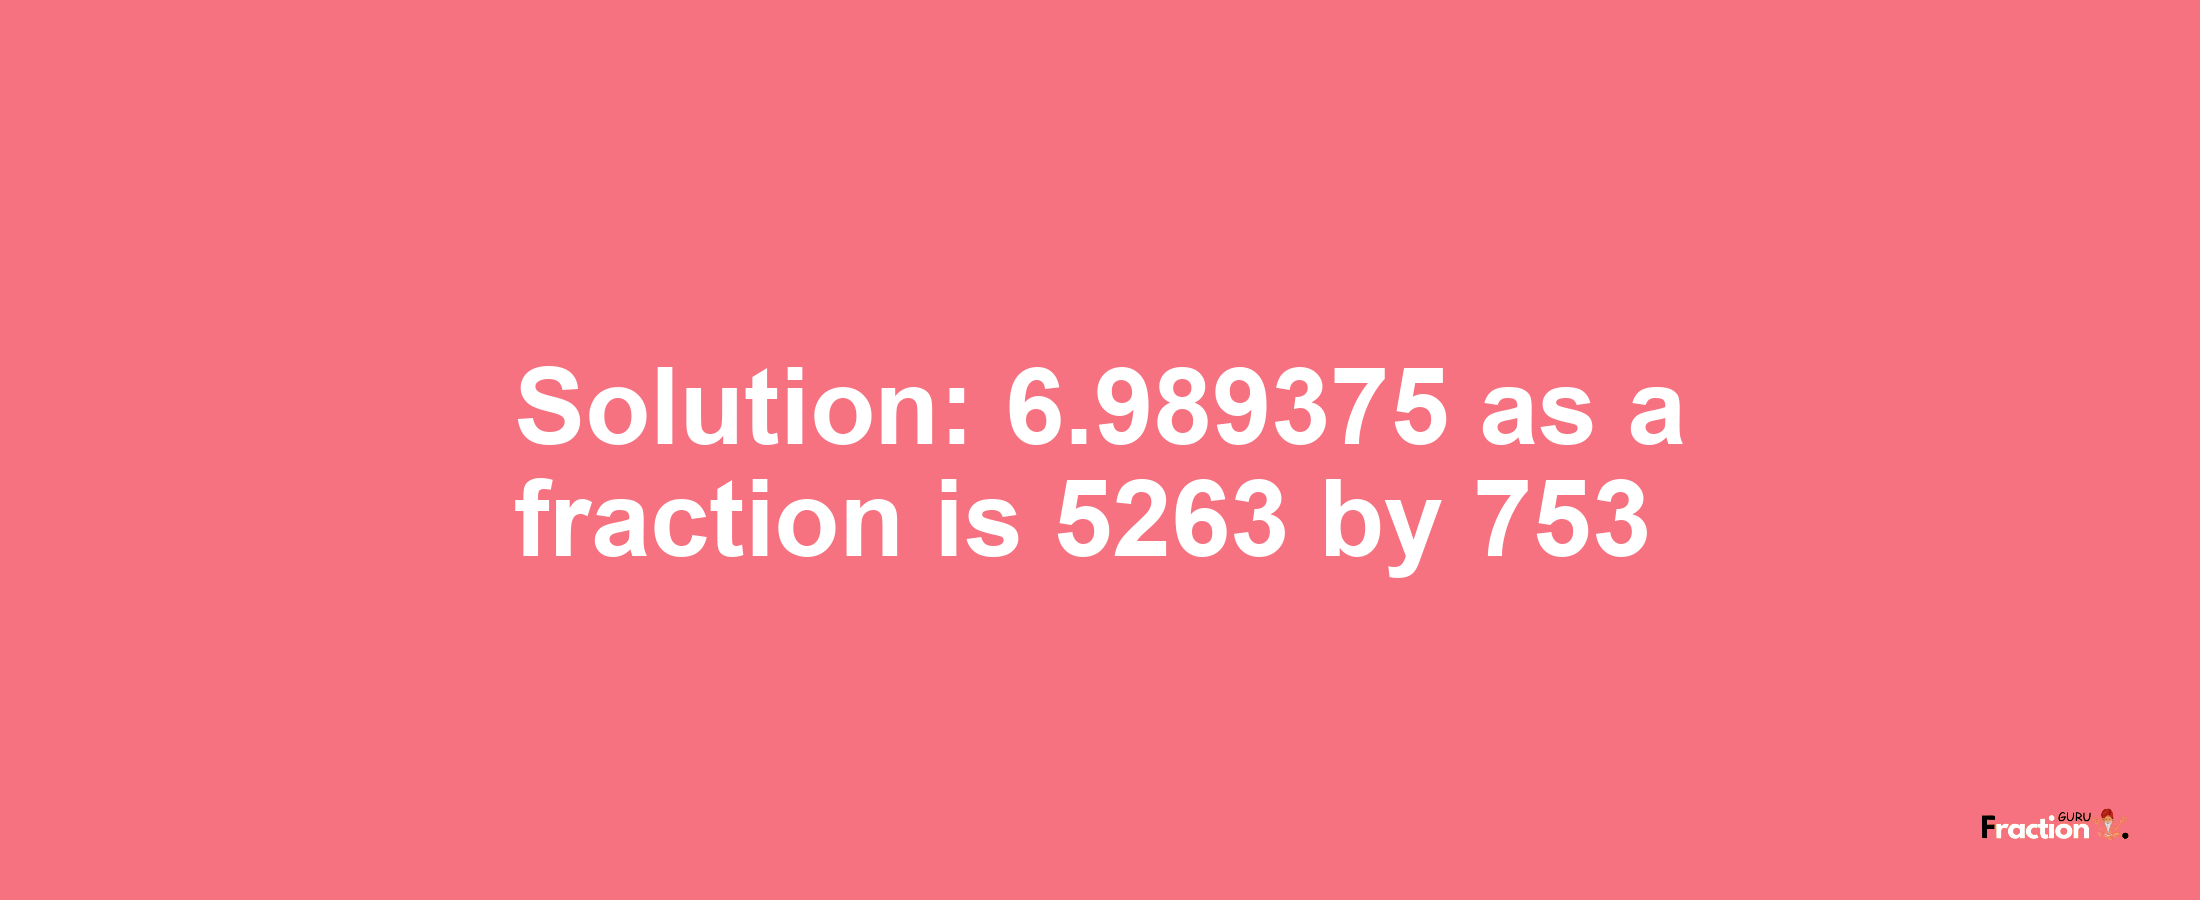 Solution:6.989375 as a fraction is 5263/753